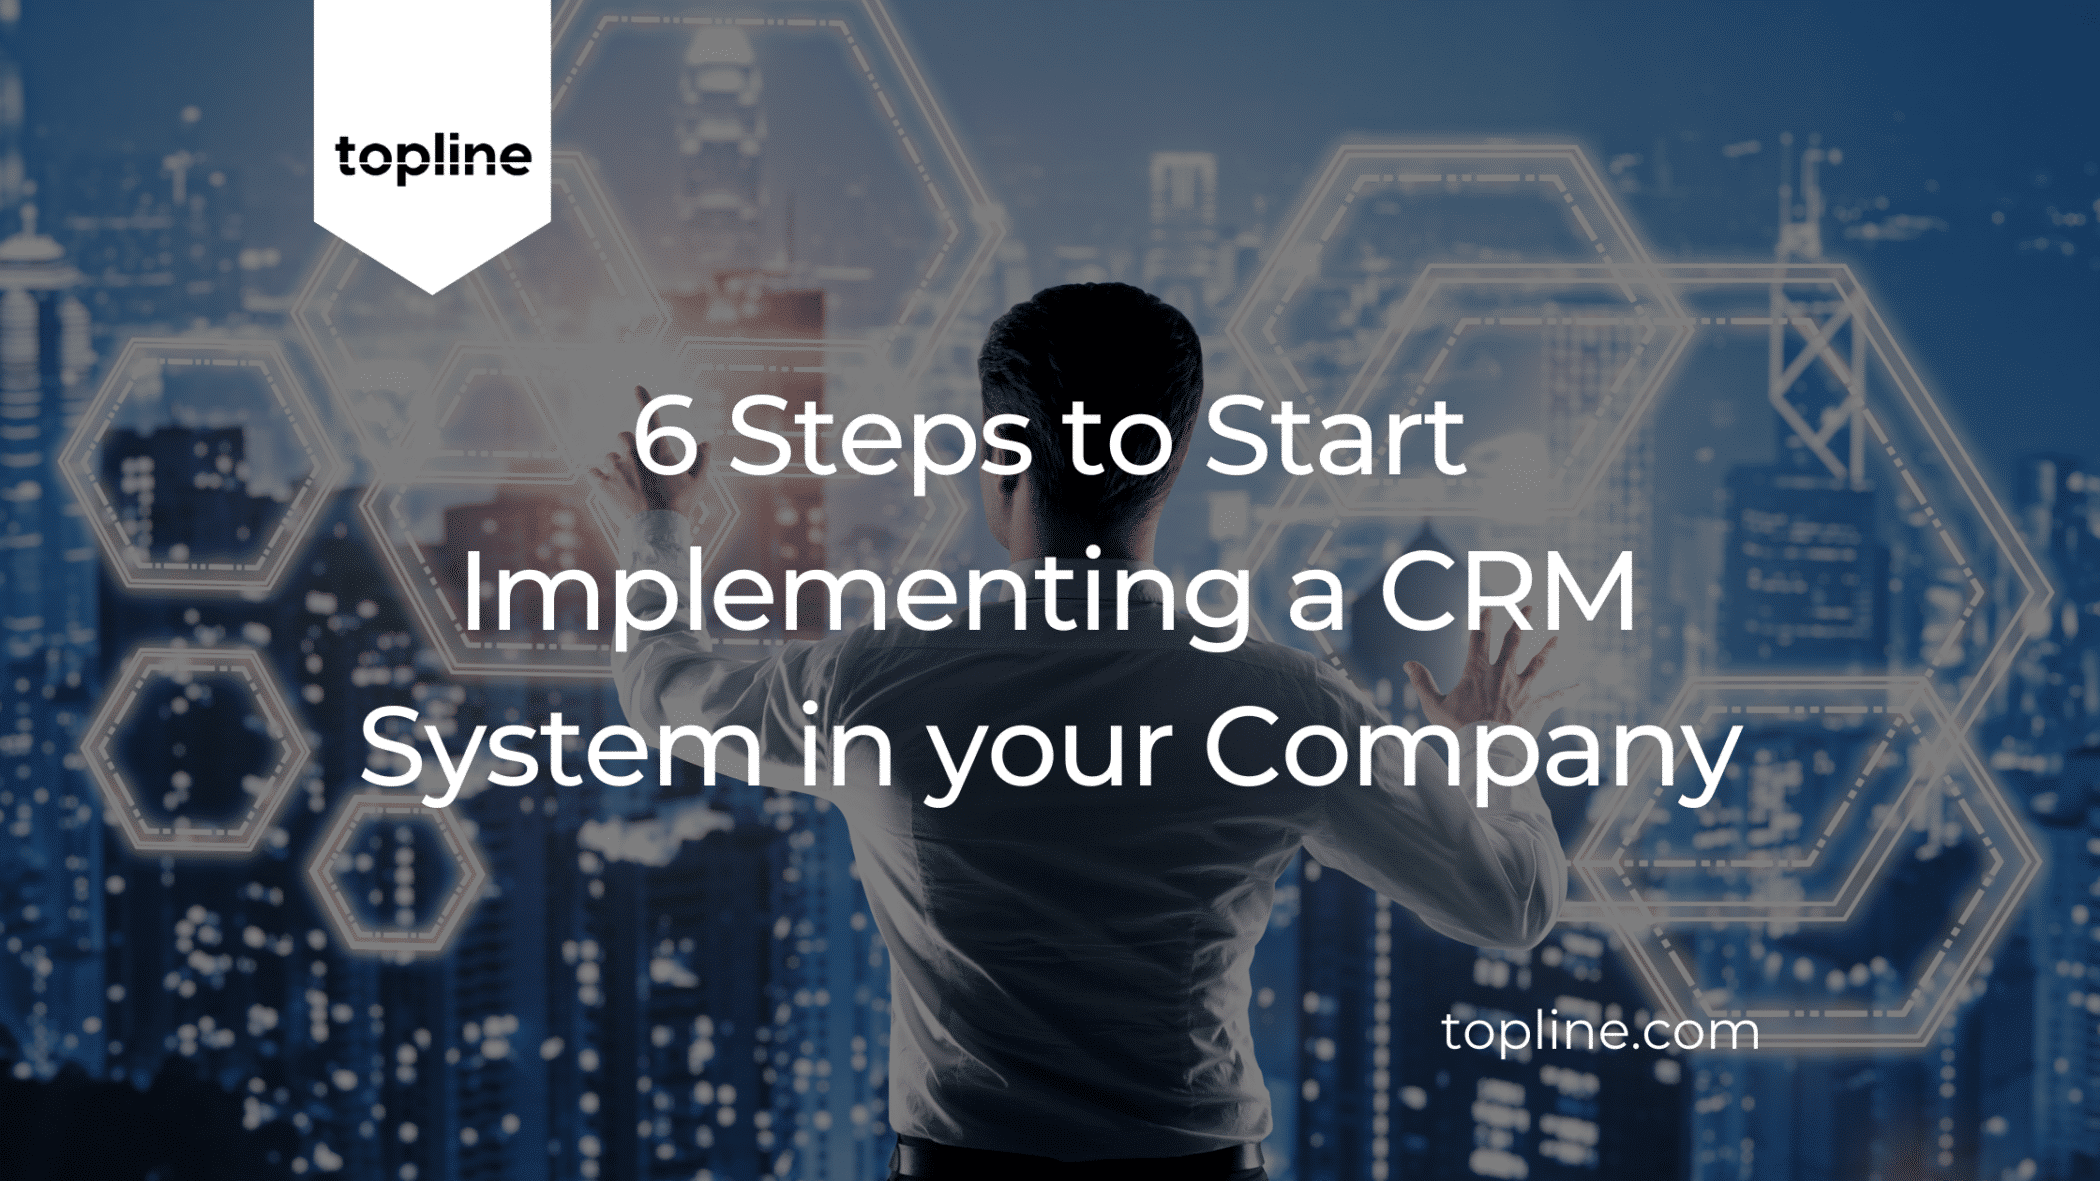 6 Steps to Start Implementing a CRM System in your Company